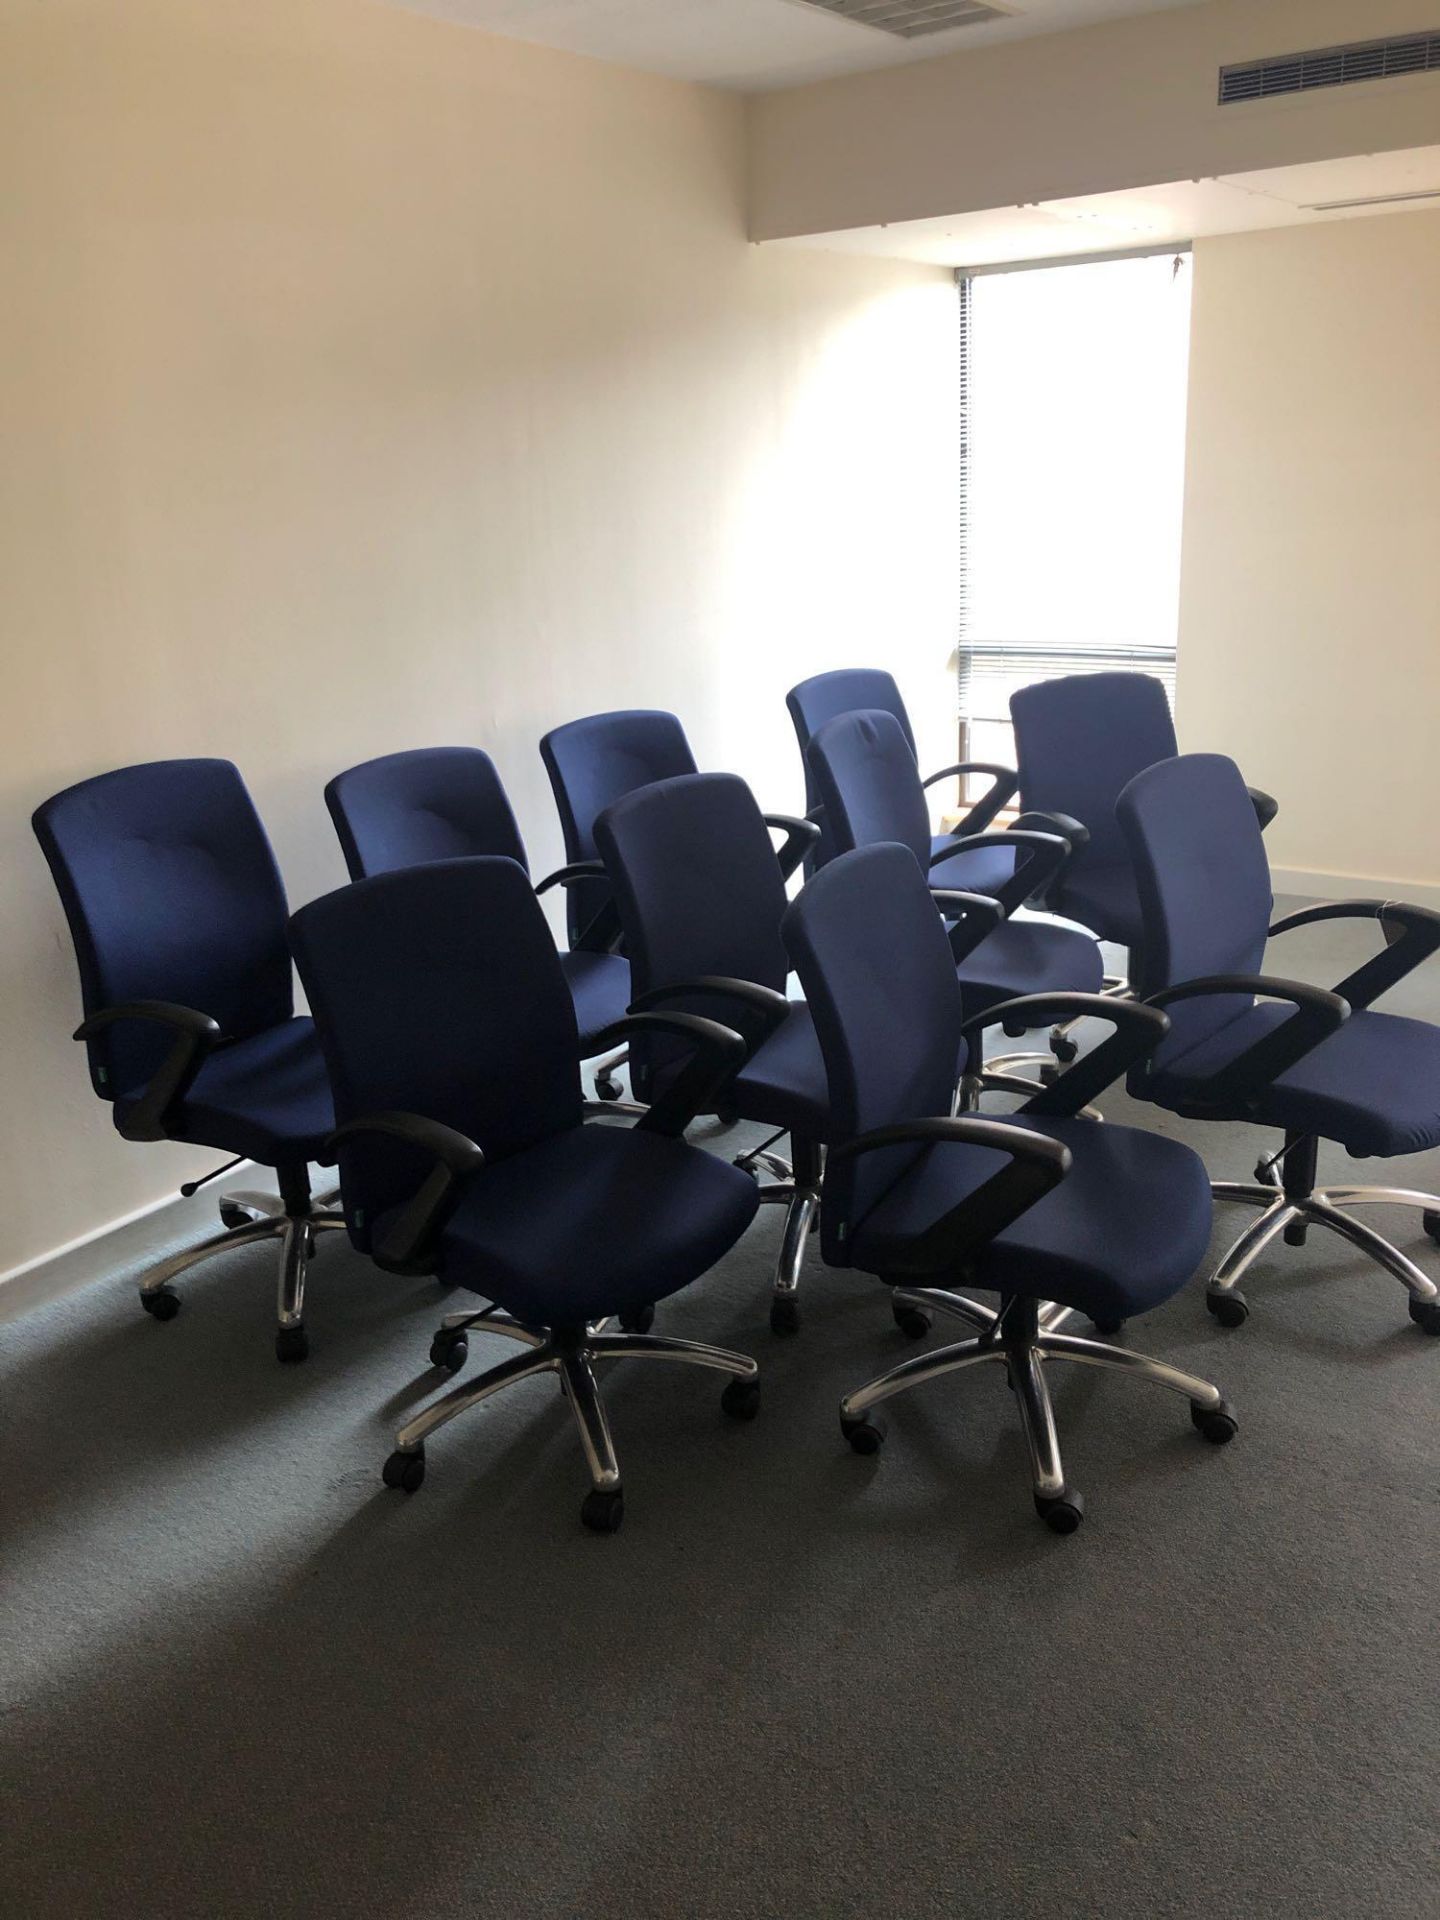 10x Franch adjustable swivel chairs